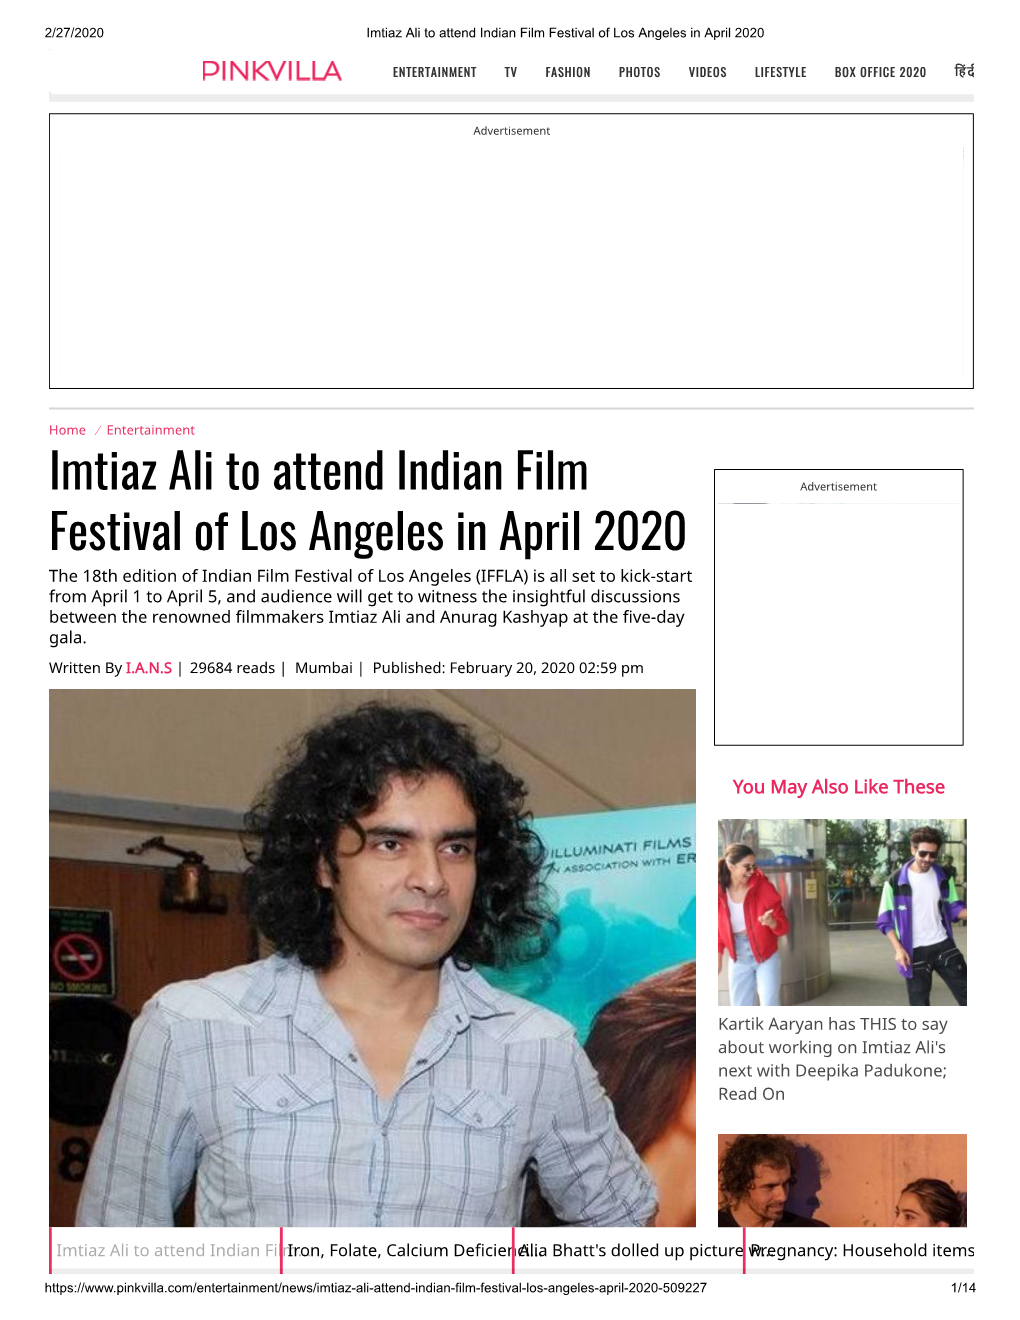 Imtiaz Ali to Attend Indian Film Festival of Los Angeles in April 2020